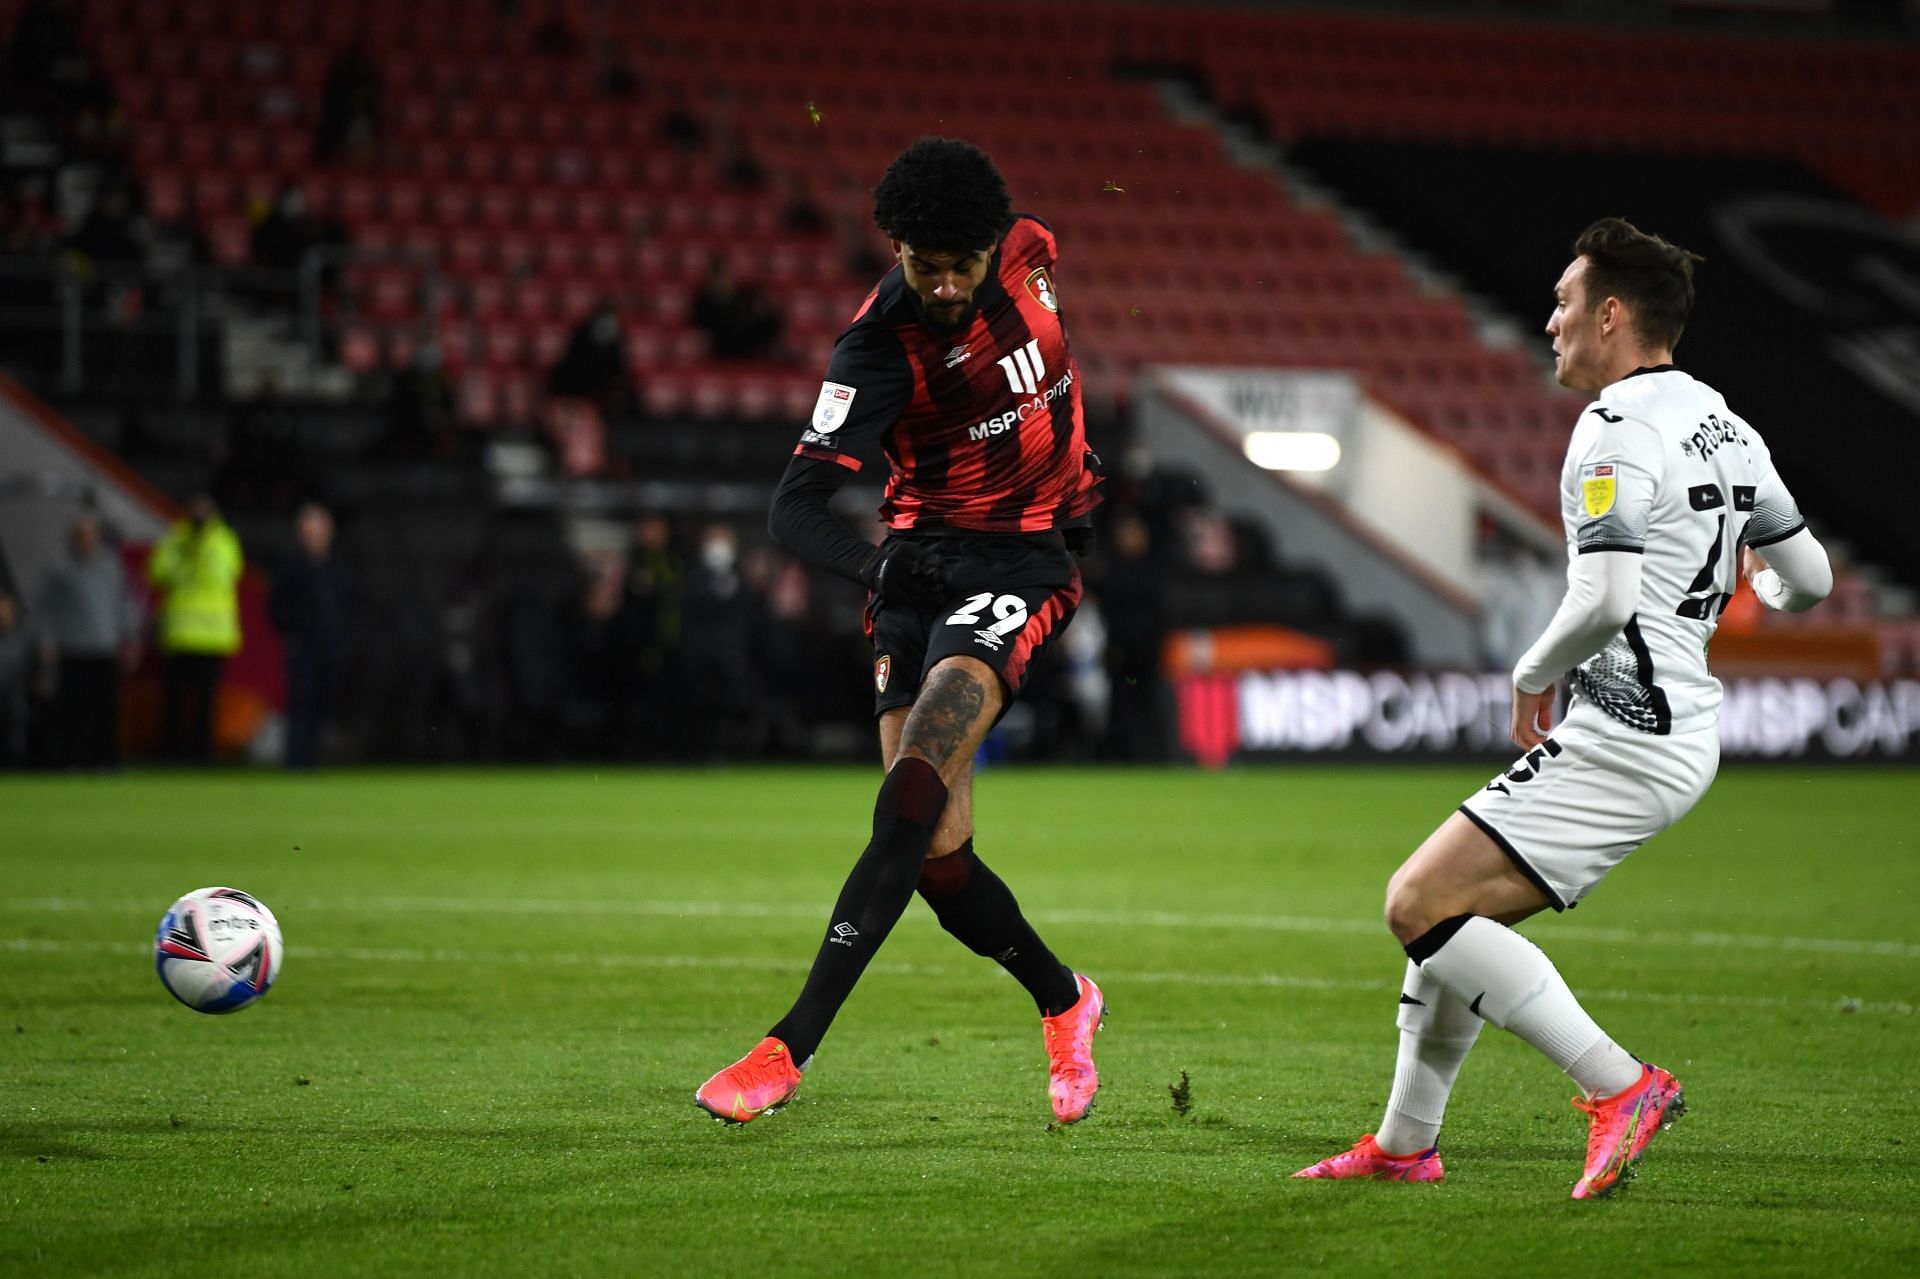 Bournemouth face Swansea City on Tuesday